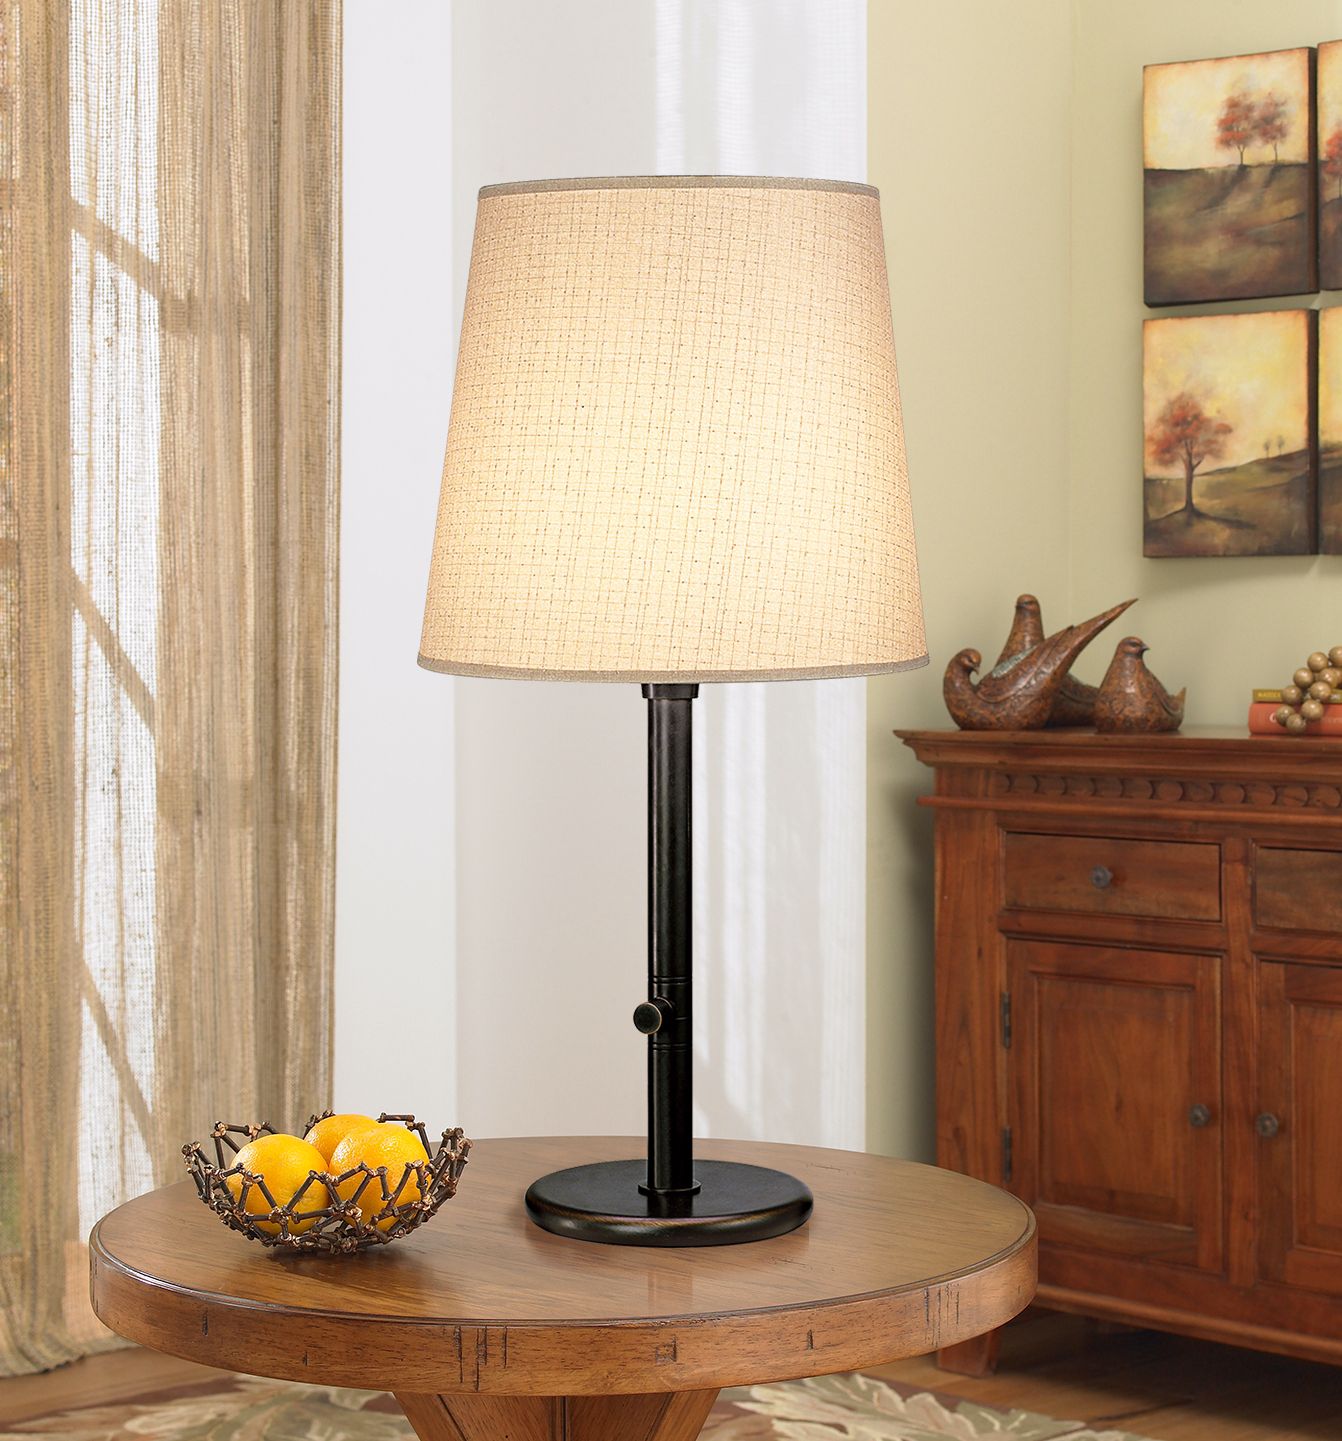 Robert Abbey Bronze Finish with Muslin Shade Table Lamp